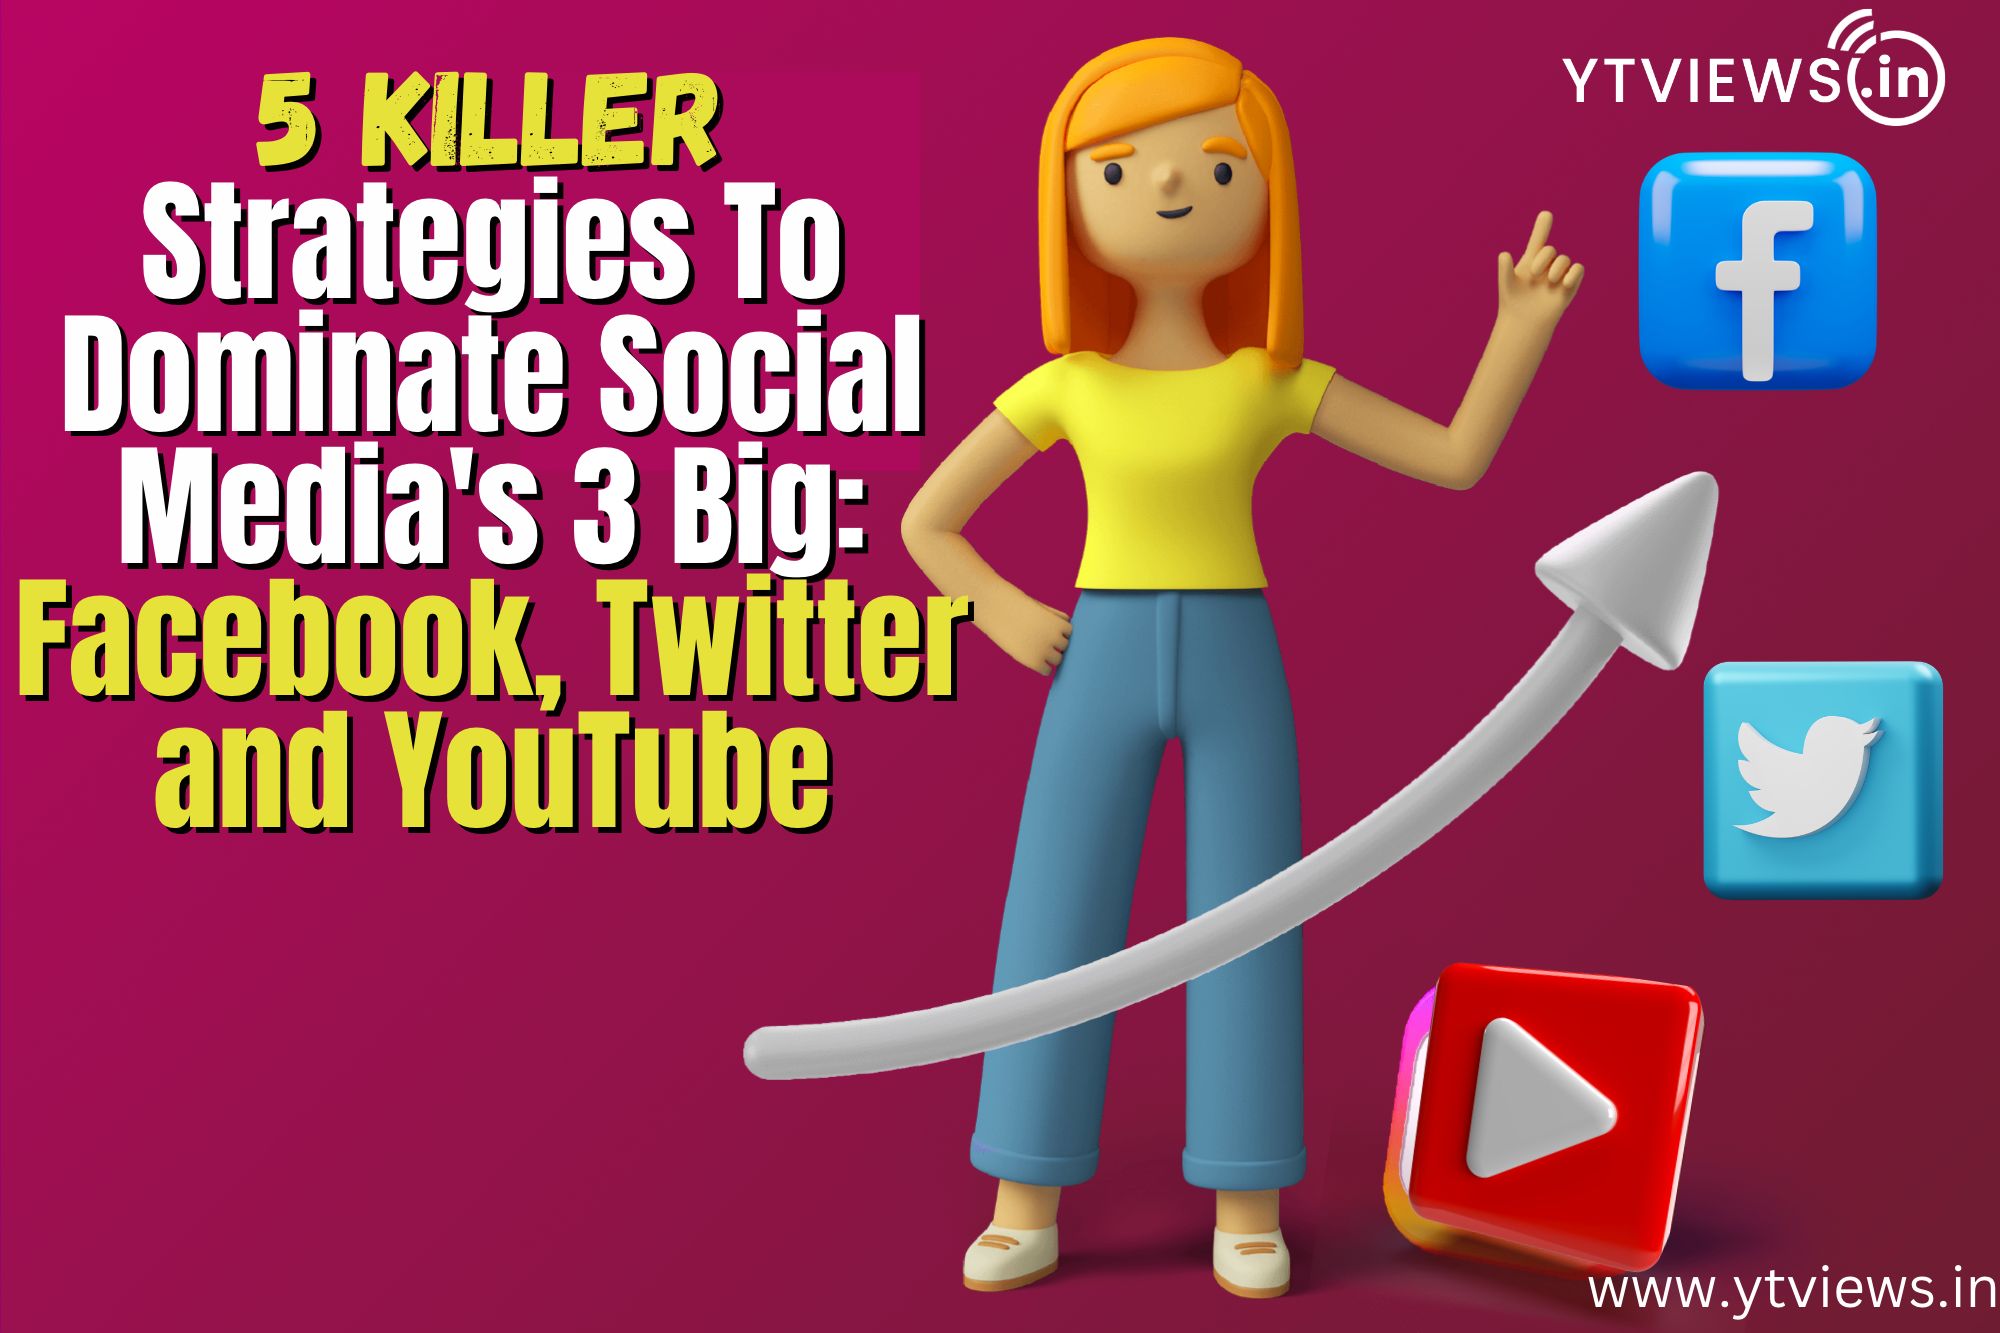 5 Killer Strategies to Dominate Social Media’s Big 3: Facebook, Twitter and YouTube